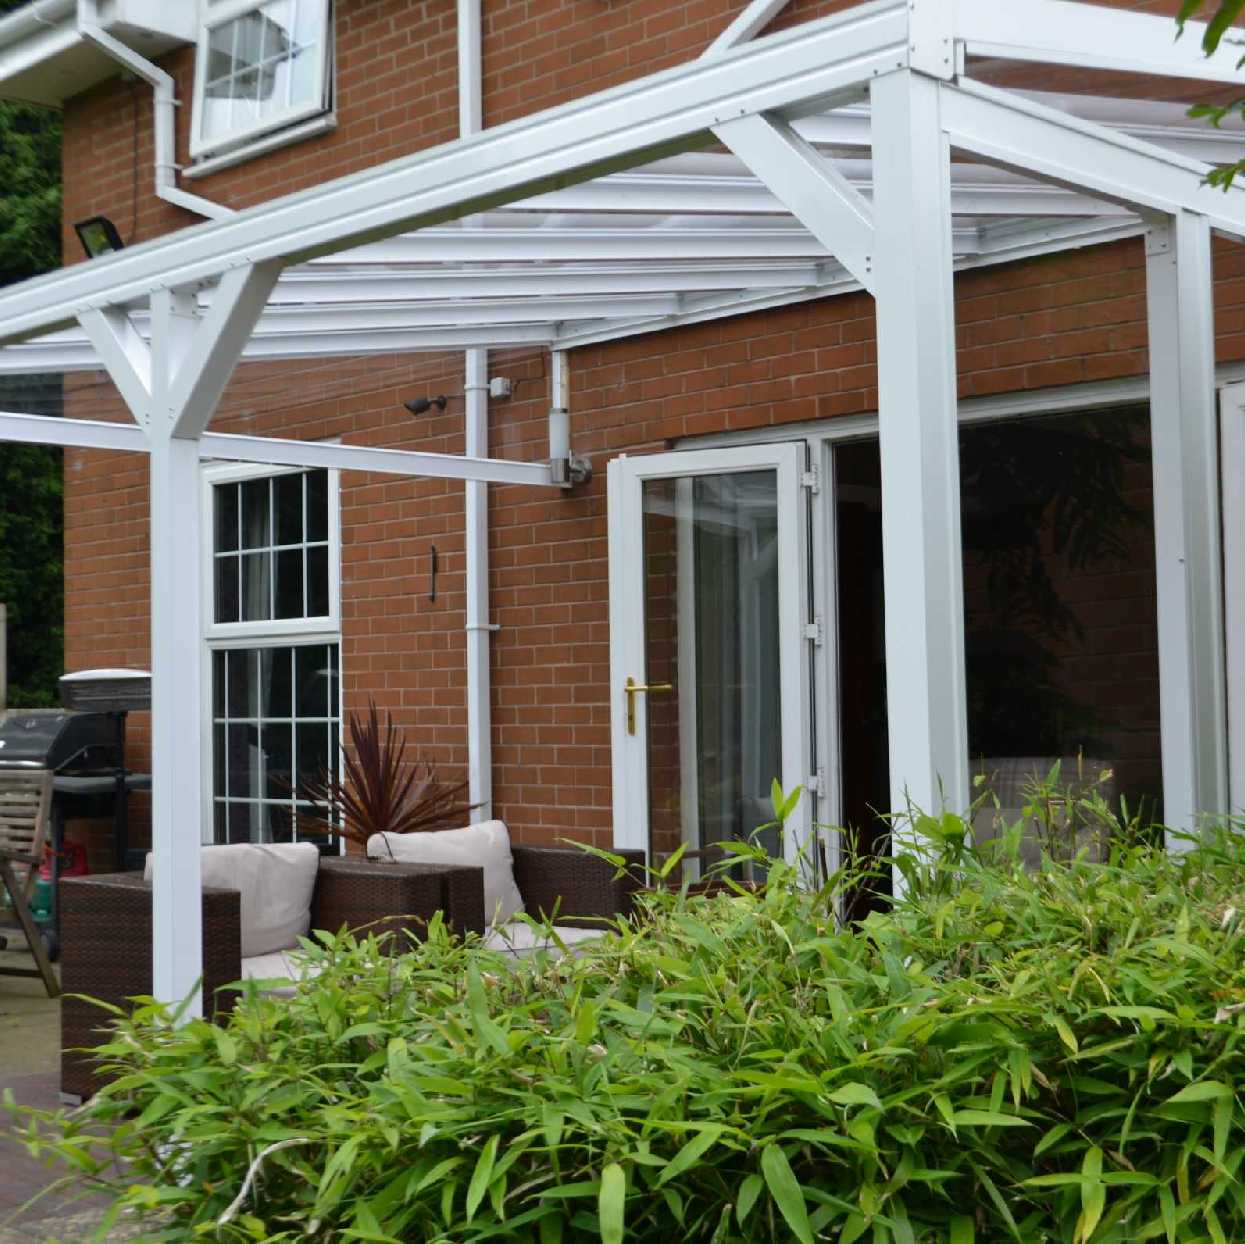 Omega Smart Lean-To Canopy, White UNGLAZED for 6mm Glazing - 4.2m (W) x 2.0m (P), (3) Supporting Posts from Omega Build